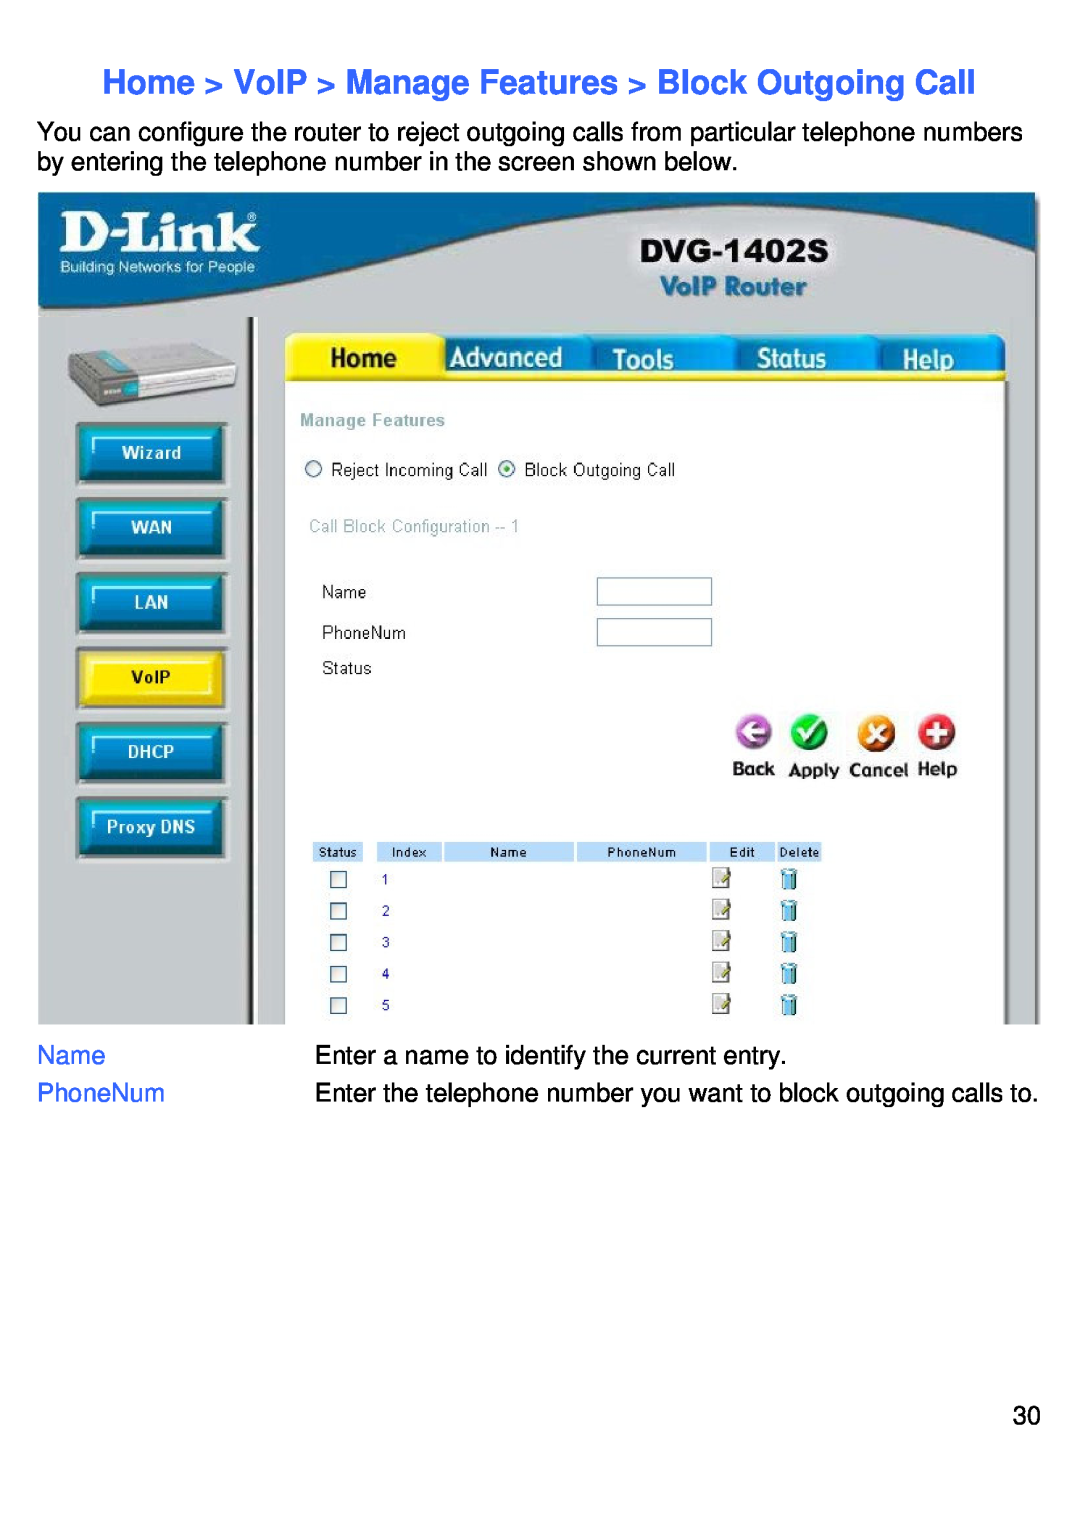 D-Link DVG-1402S Home VoIP Manage Features Block Outgoing Call, Name, Enter a name to identify the current entry, PhoneNum 